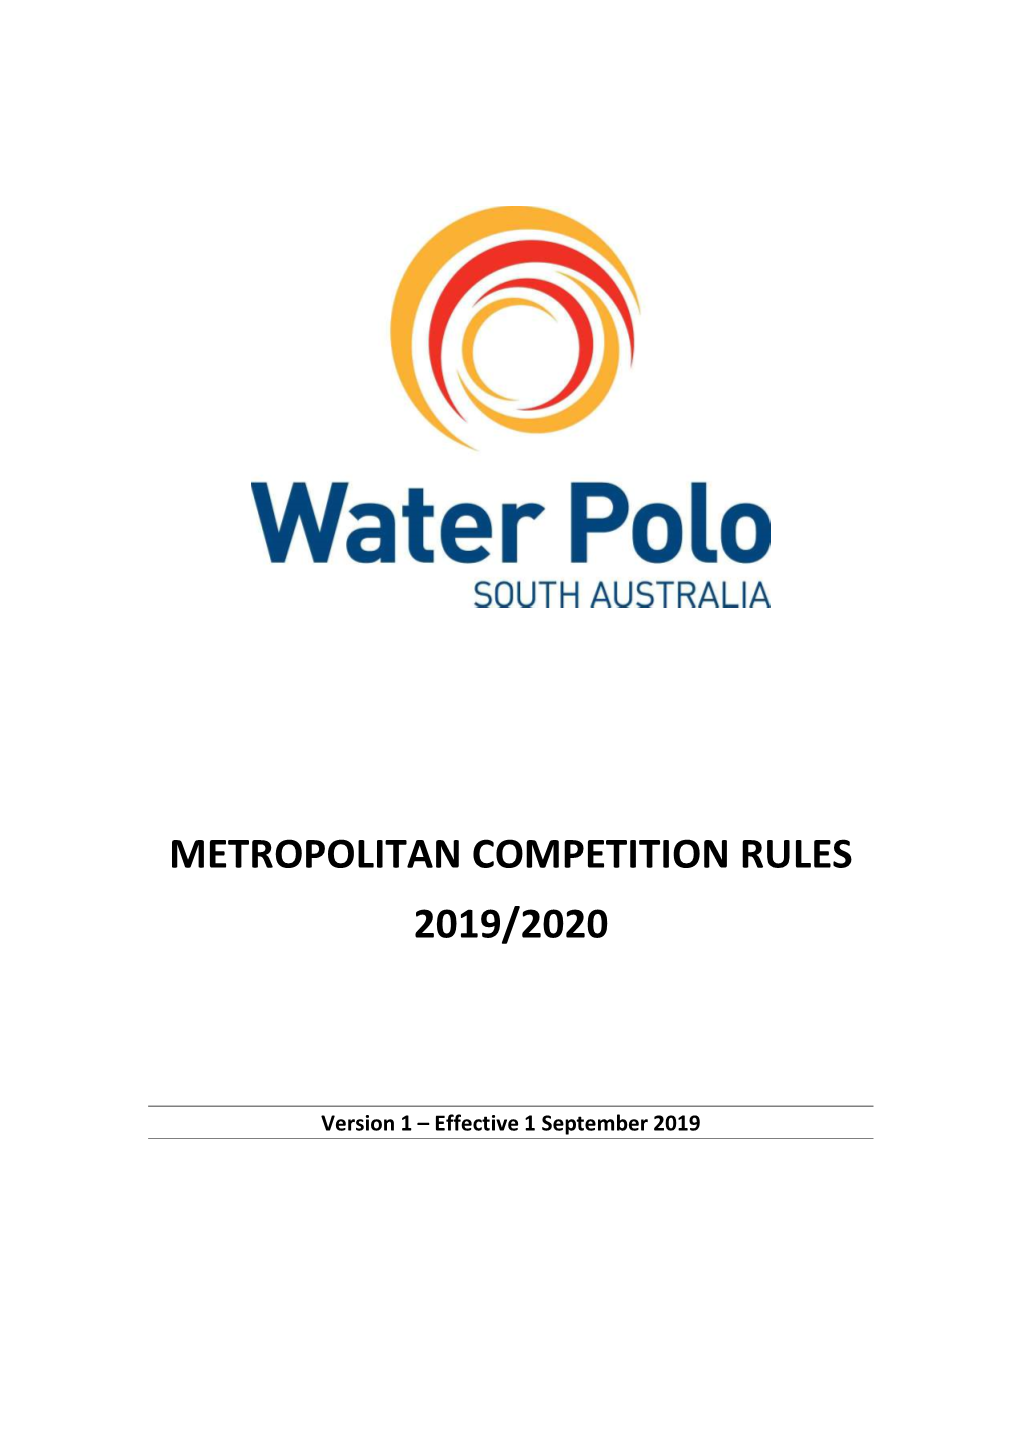 Metropolitan Competition Rules 2019/2020